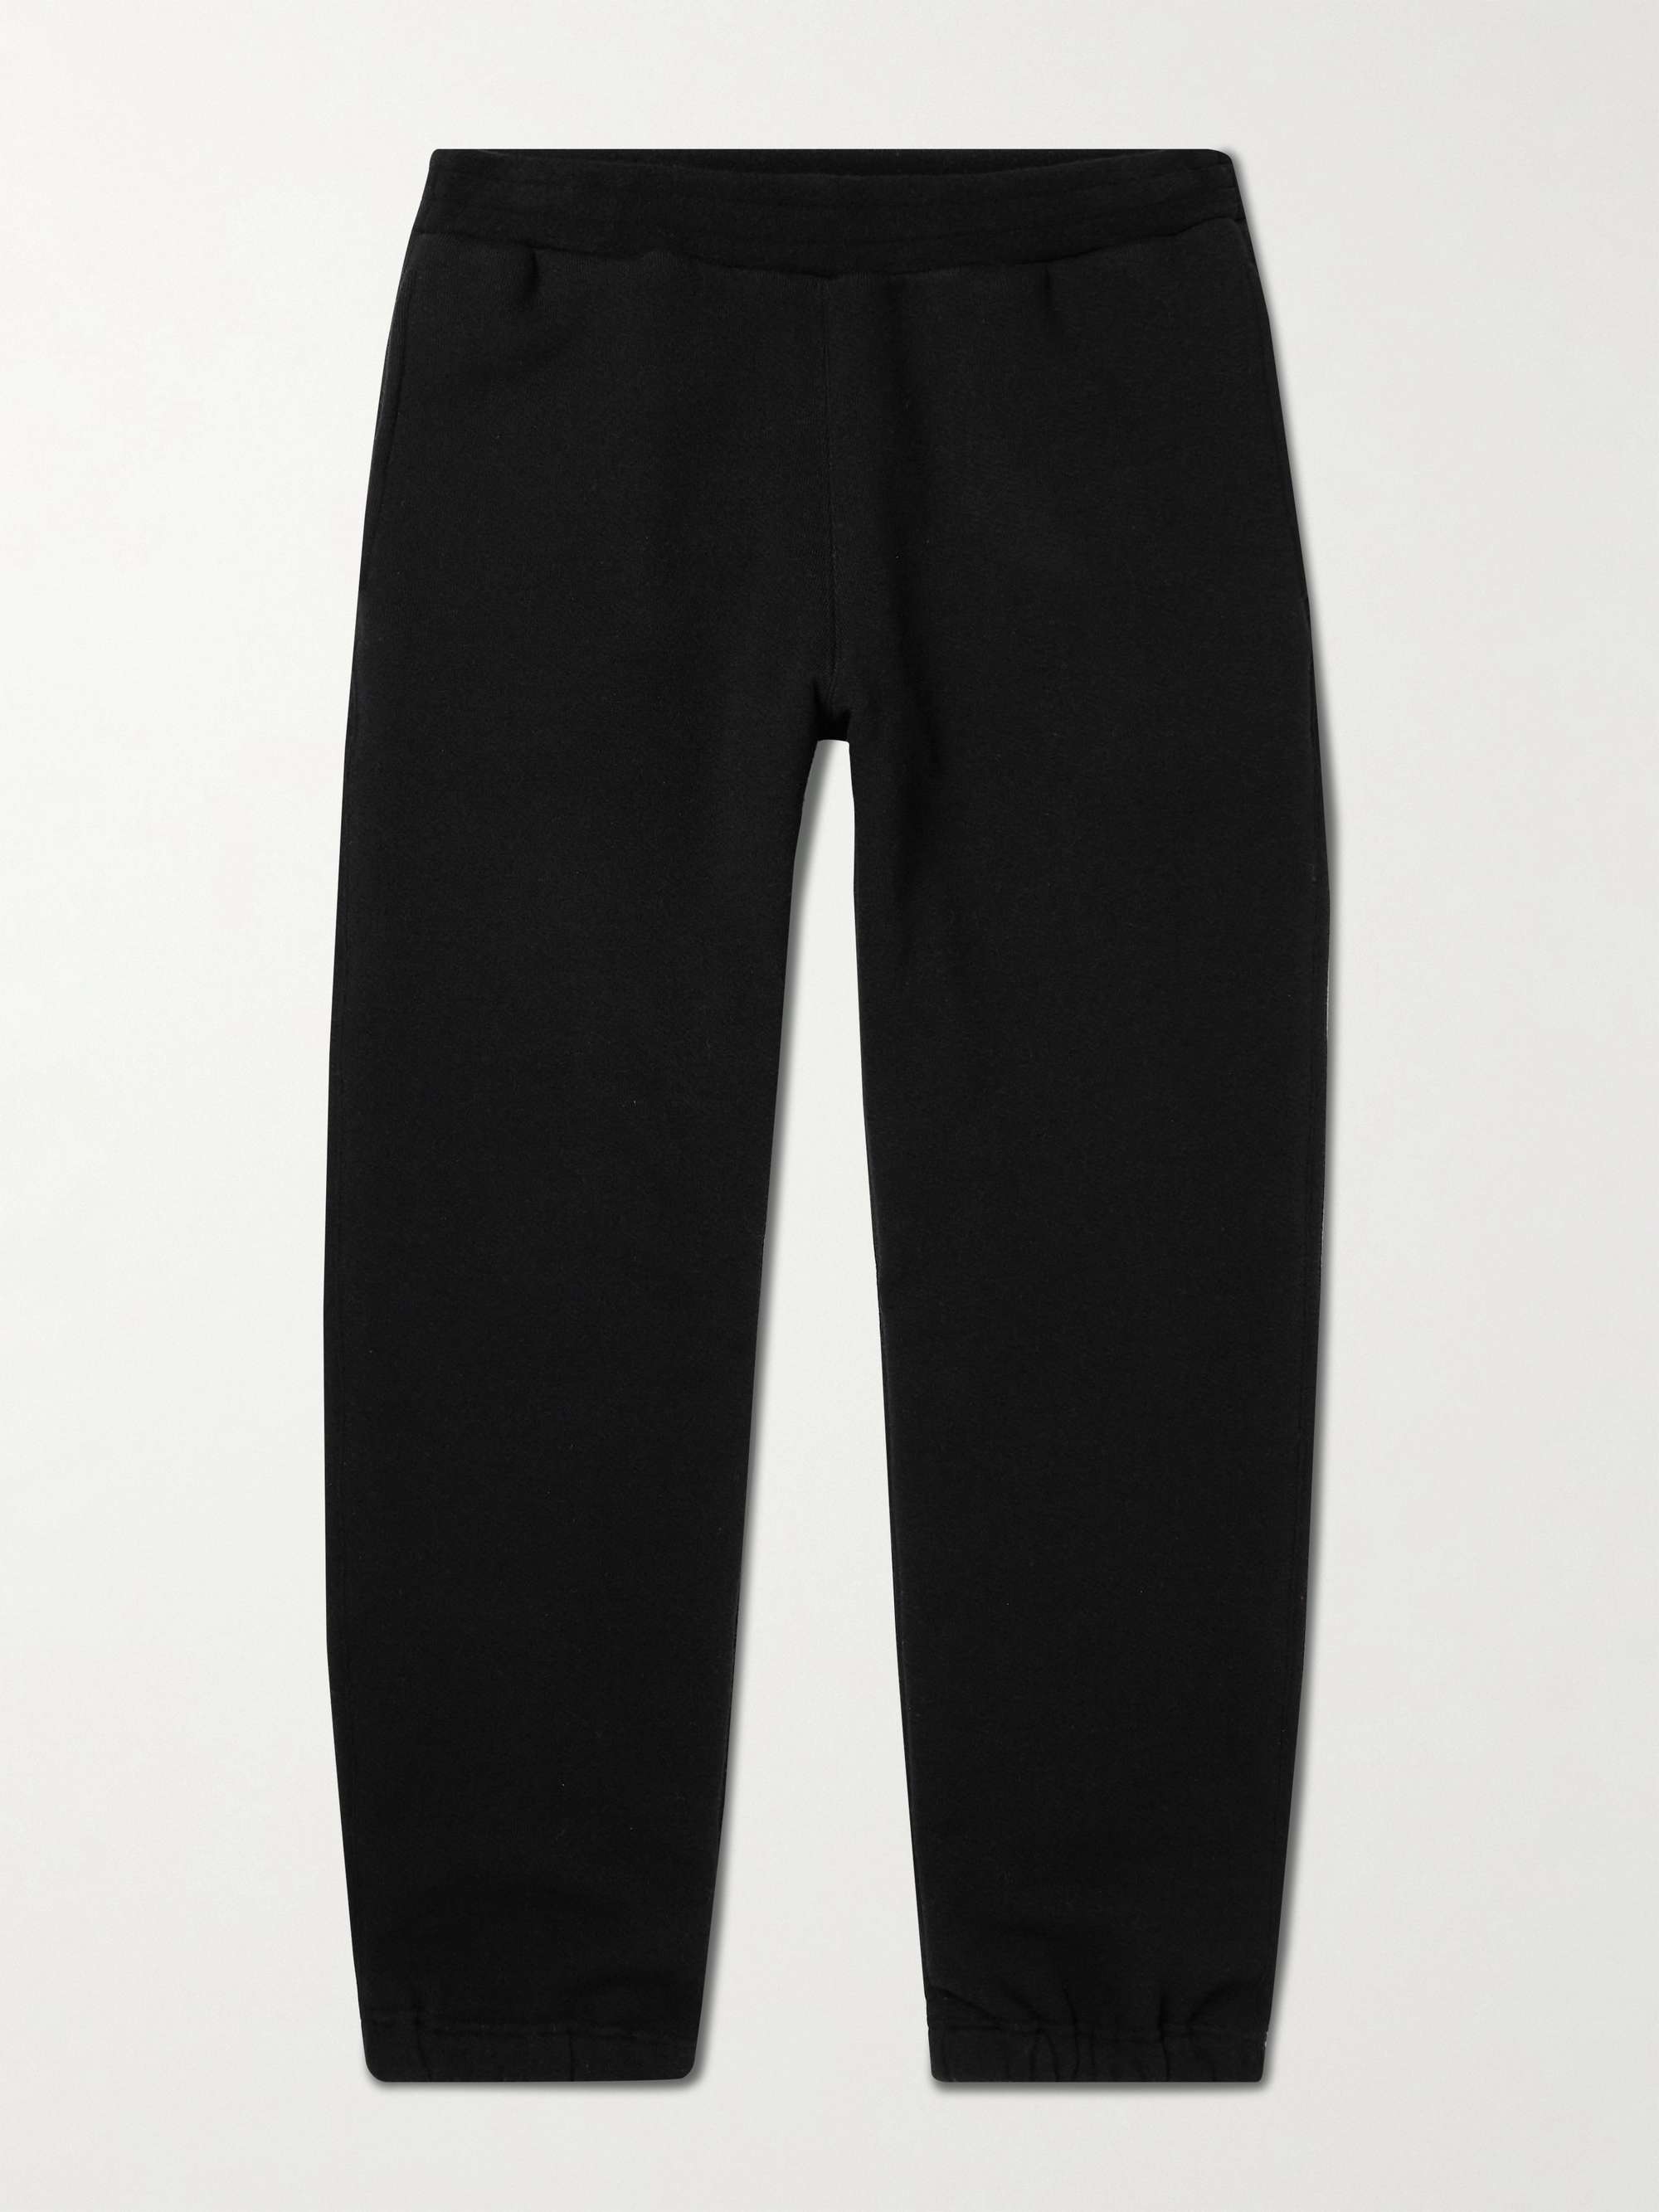 SSAM Tomo Tapered Cotton and Camel Hair-Blend Sweatpants